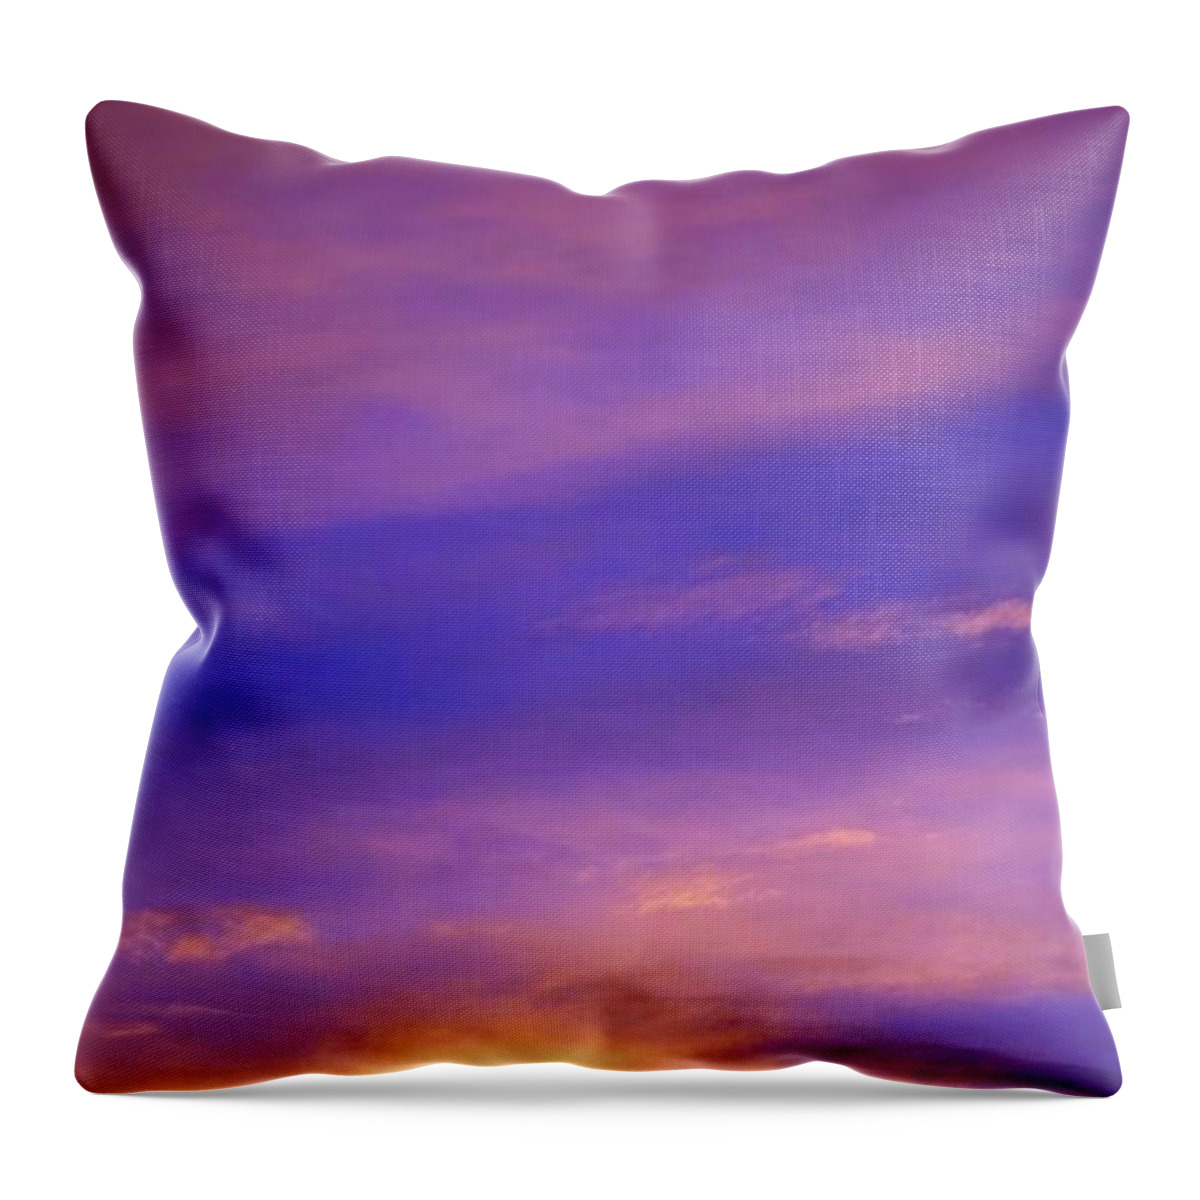 Sunrise Throw Pillow featuring the photograph Lavender Sunrise by Sue Halstenberg